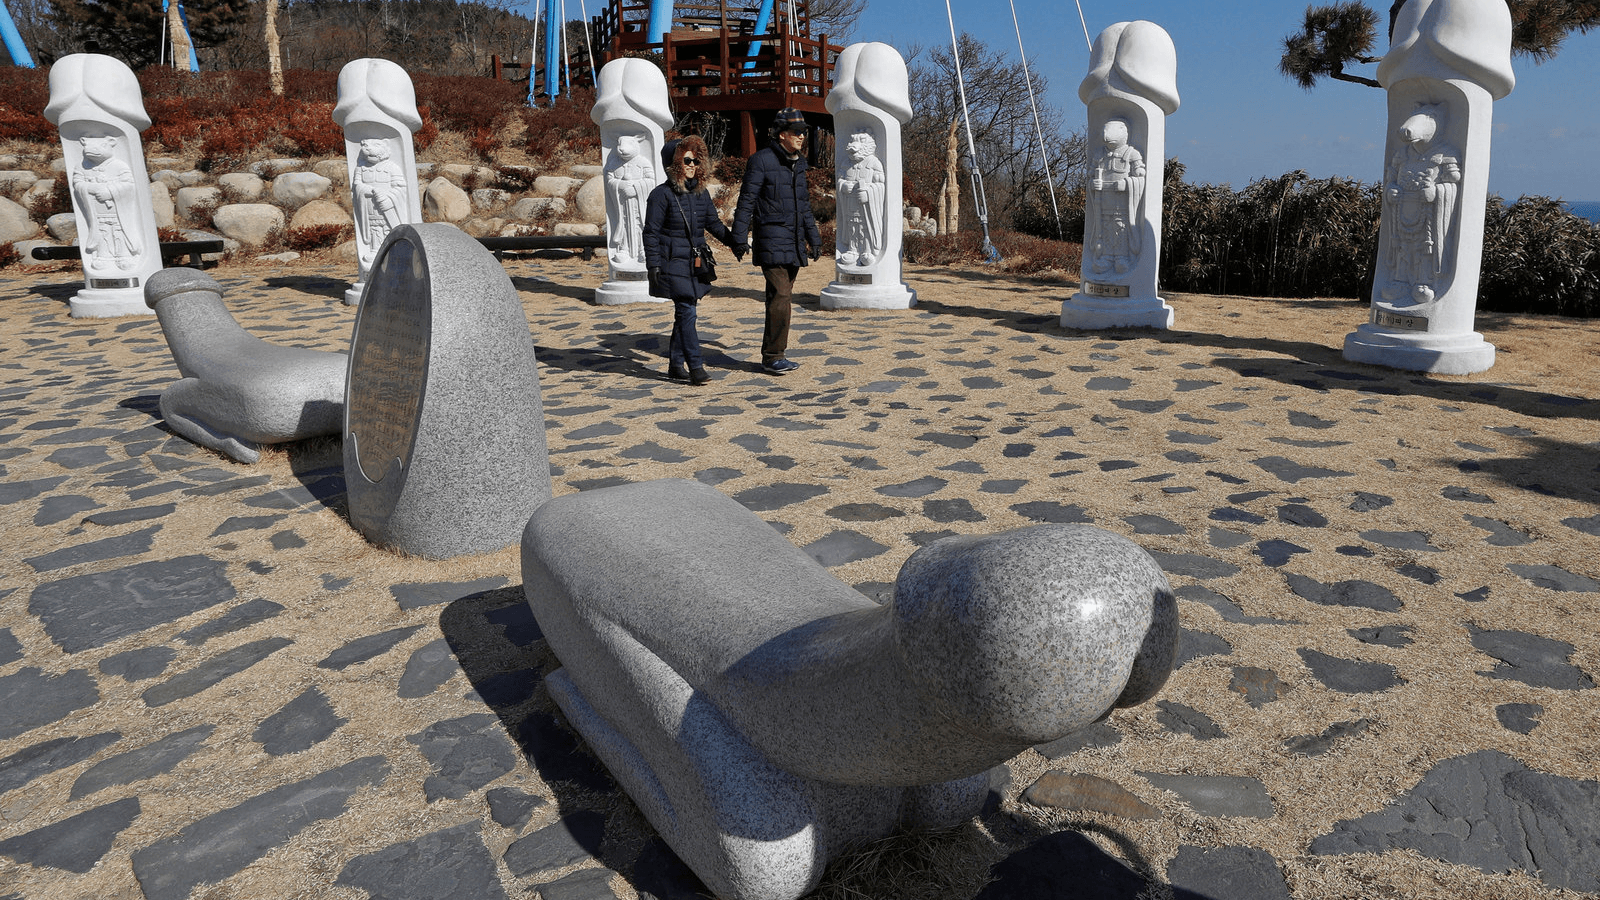 Tourists look at statues in South Korea's Haeshindang Park, also know as "Penis Park," a shrine to fertility dedicated to the legend of a local girl who died a virgin, in Sinnam, South Korea, Feb. 12, 2018.